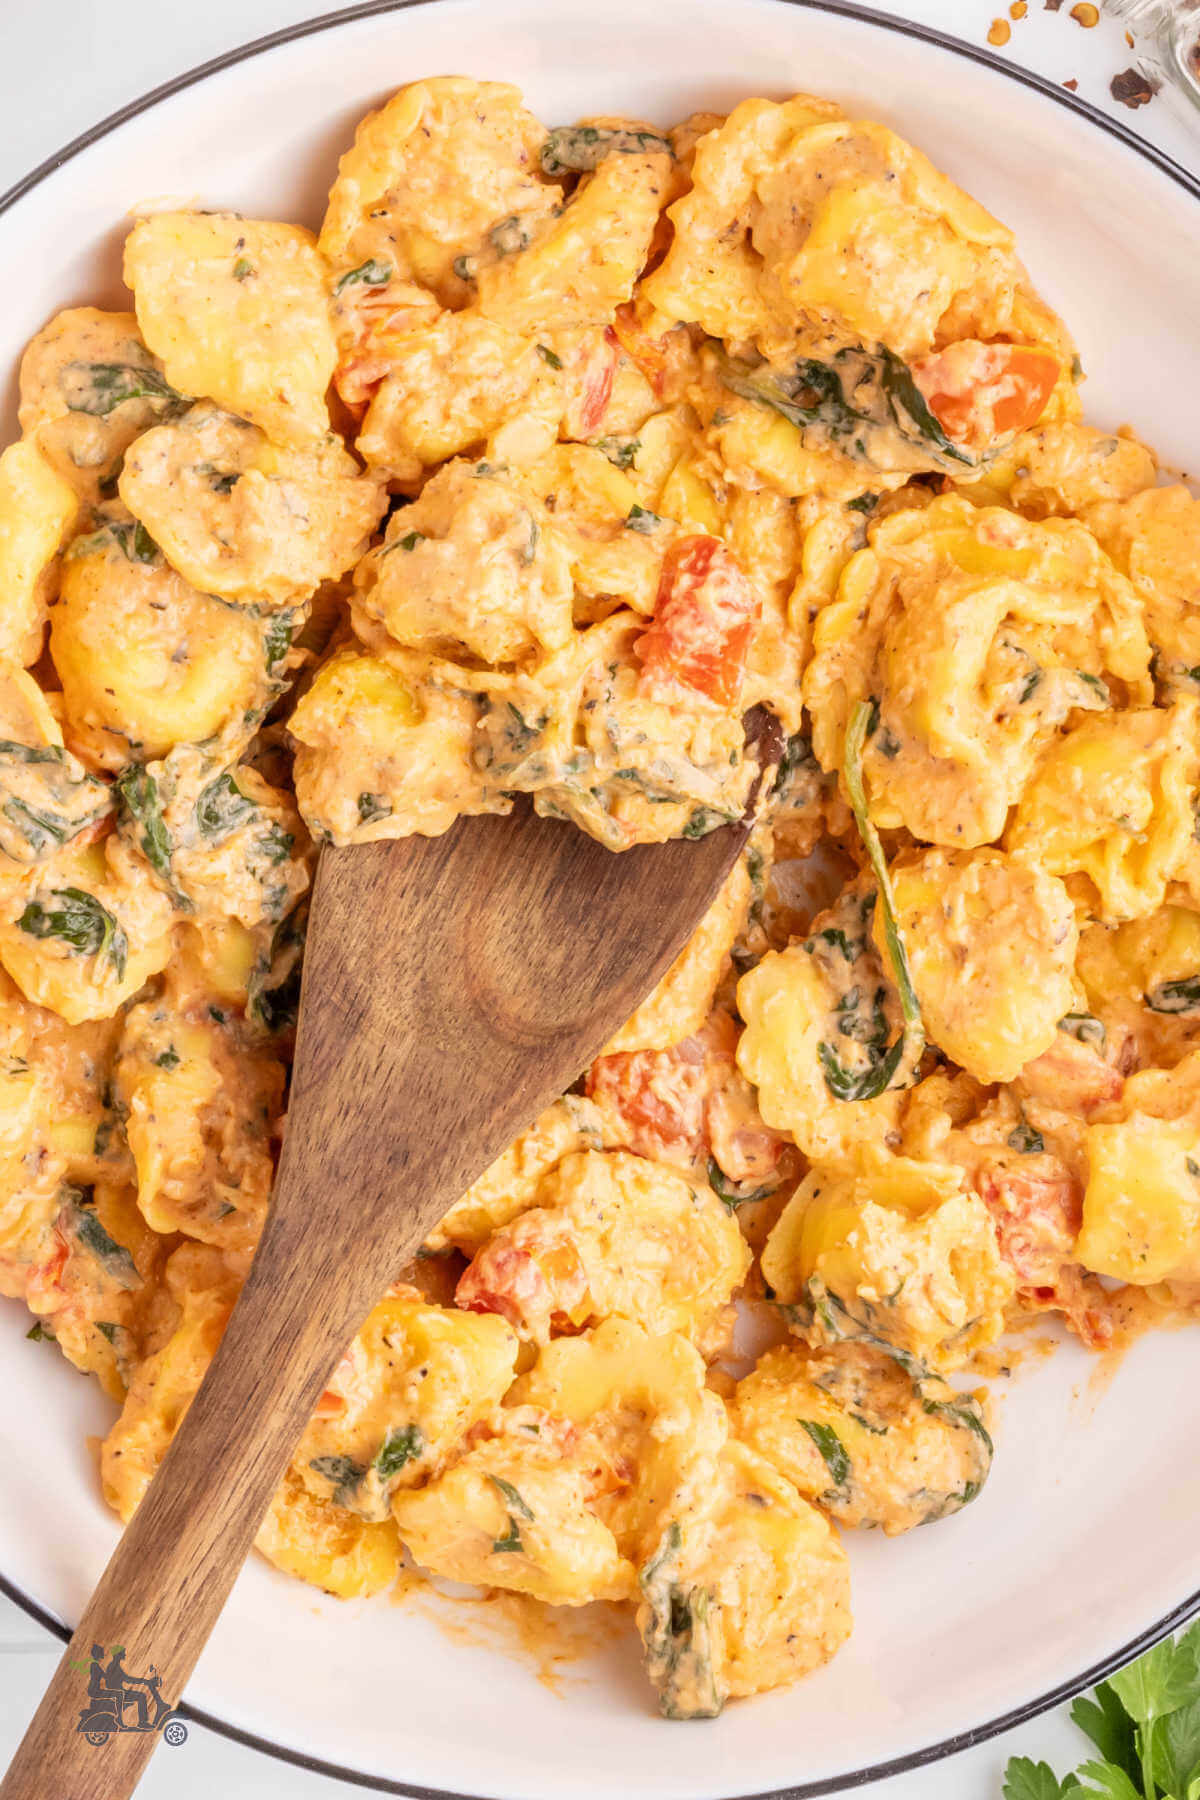 Cheese tortellini pasta drenched in a creamy garlicky sauce with tomatoes and spinach. 